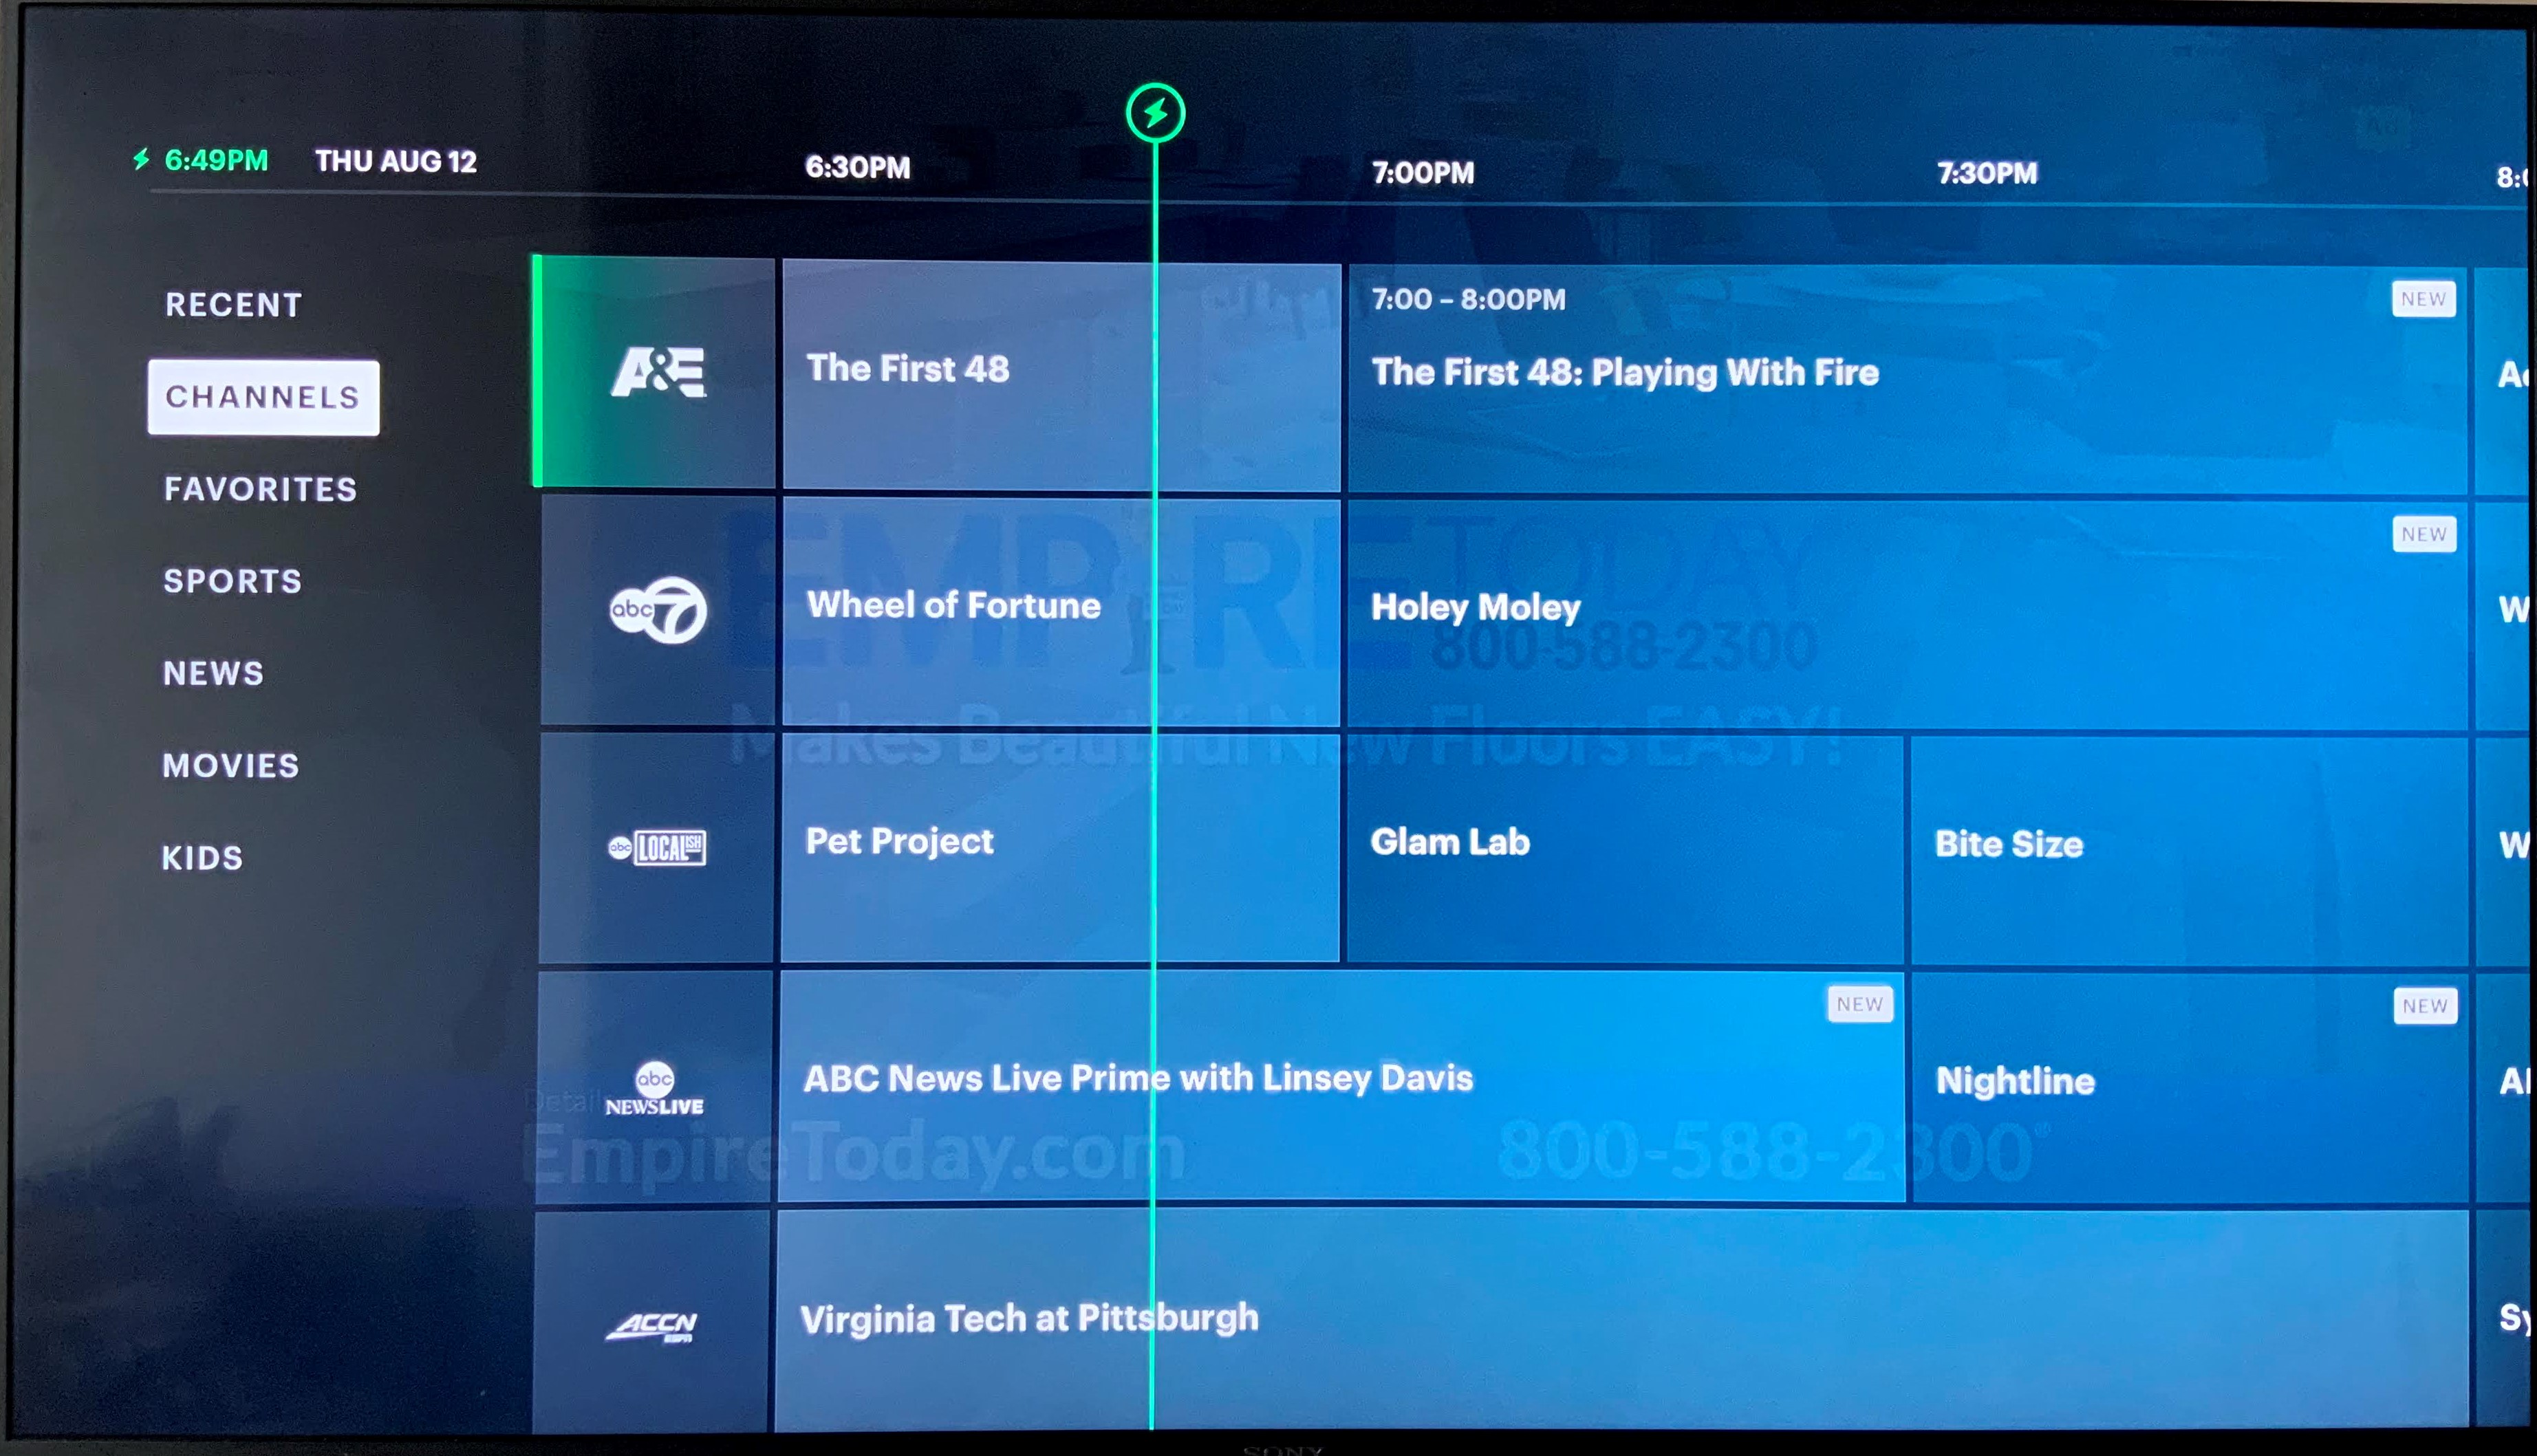 Hulu Live TV Channels A Full List Of Networks And Packages